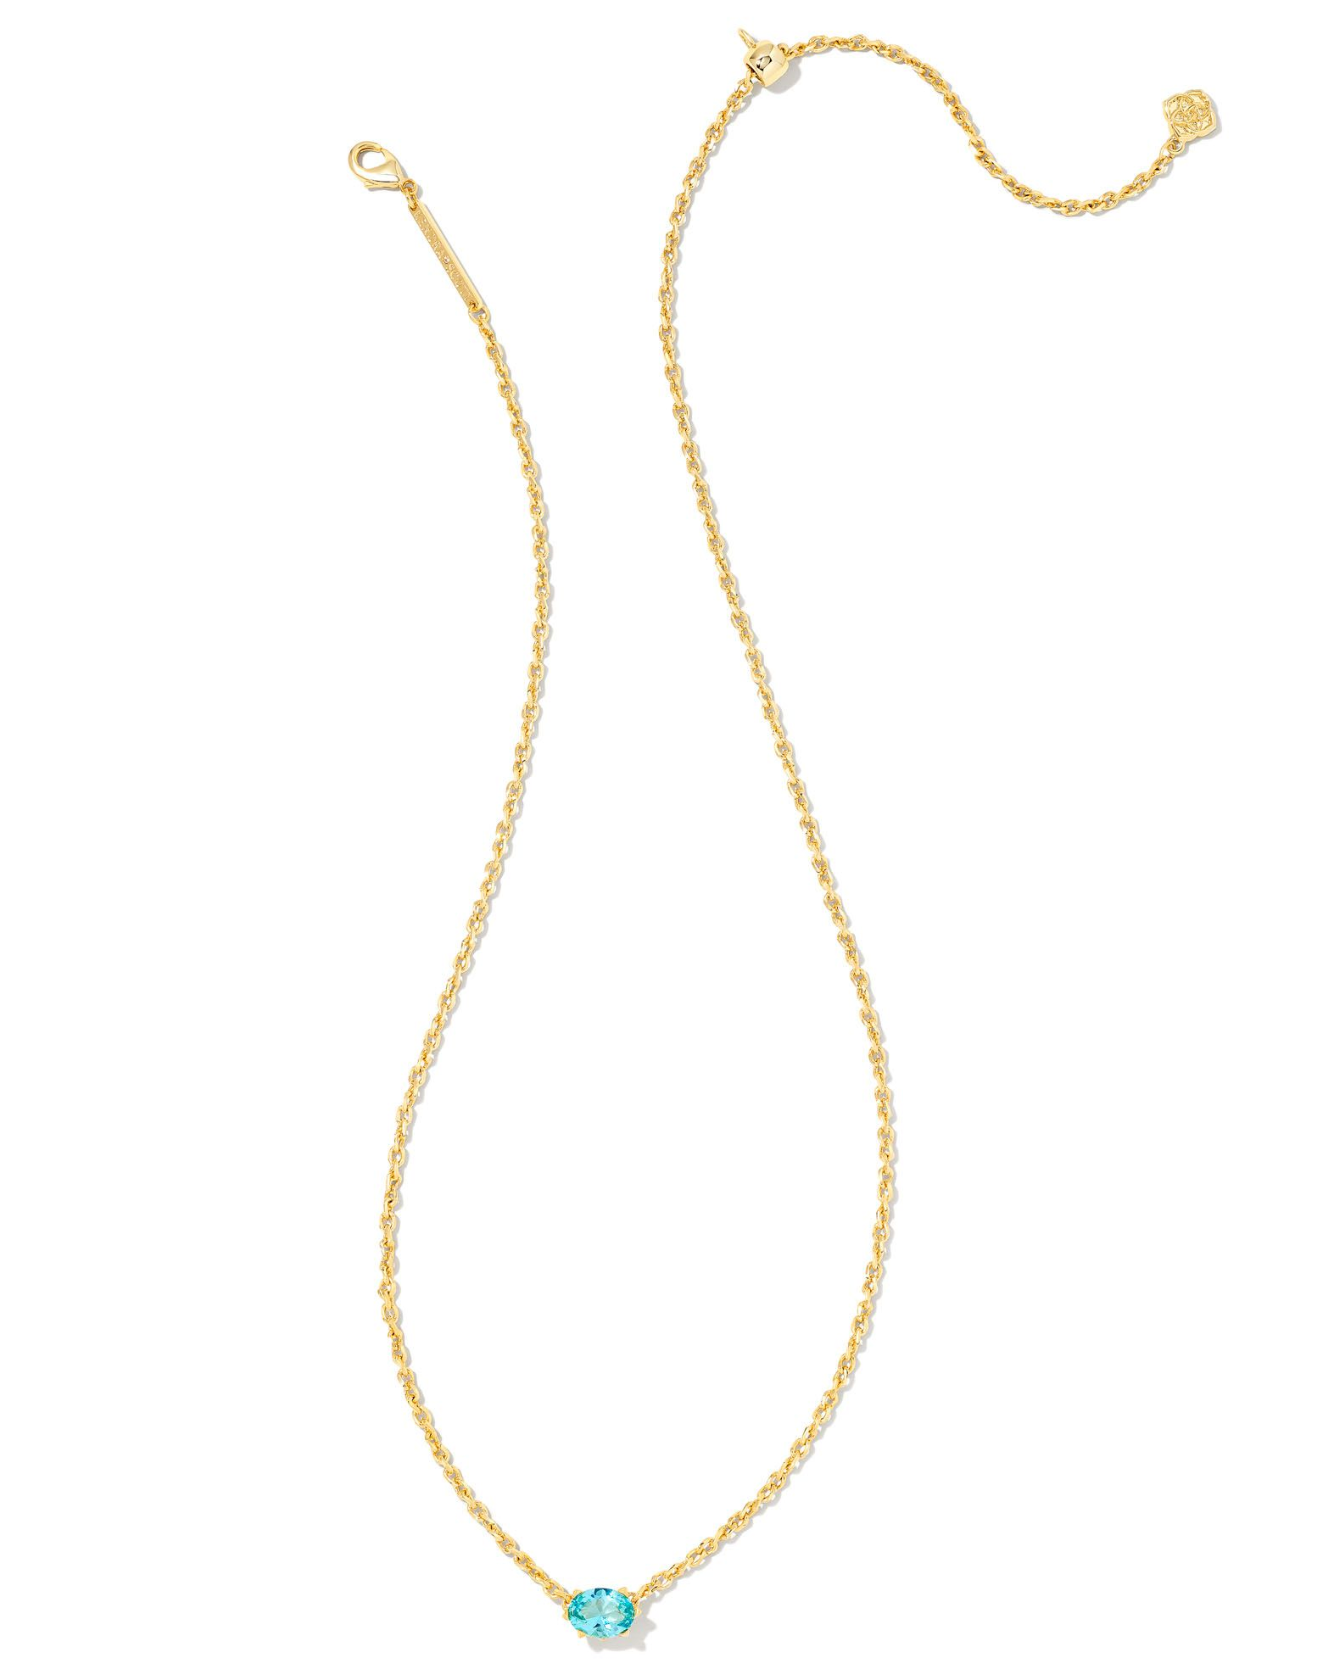 Cailin Gold Pendant Necklace in Aqua Crystal | KENDRA SCOTT - The Street Boutique 